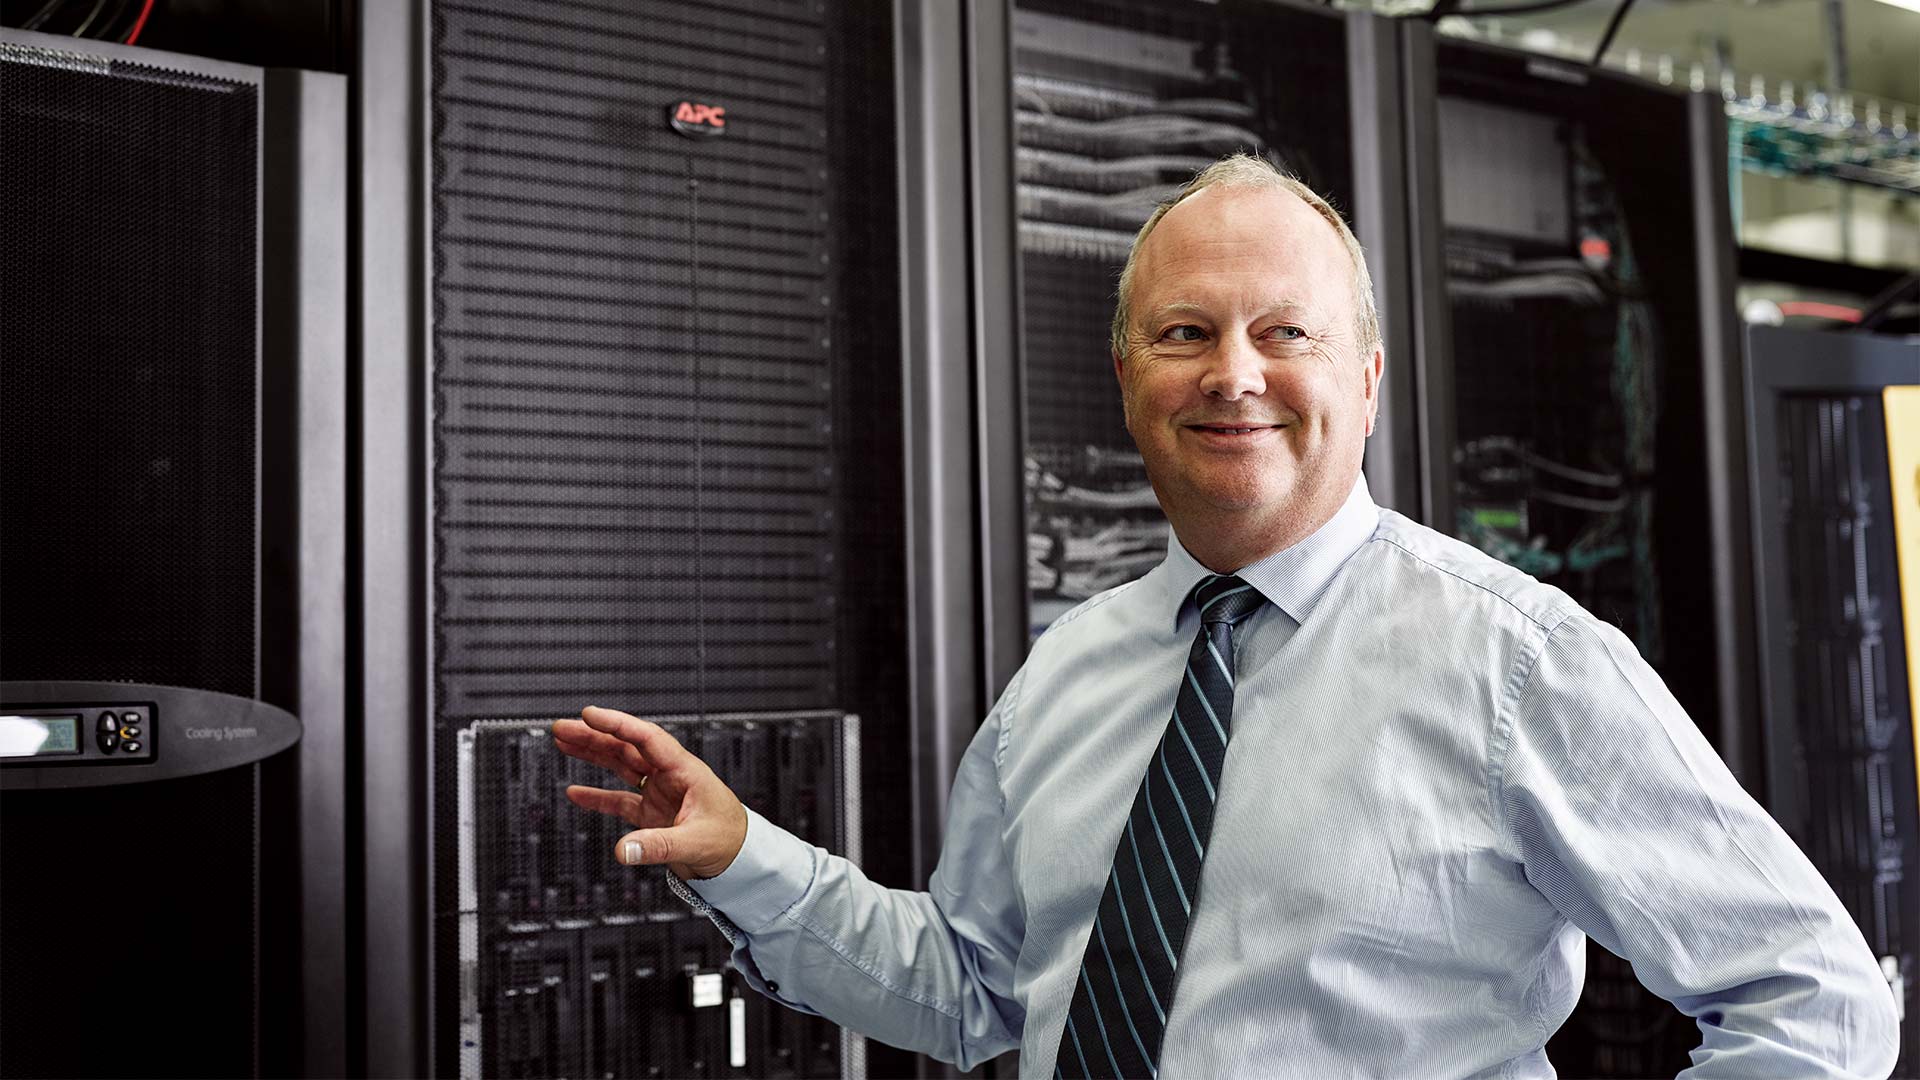 man standing in front of datacenter